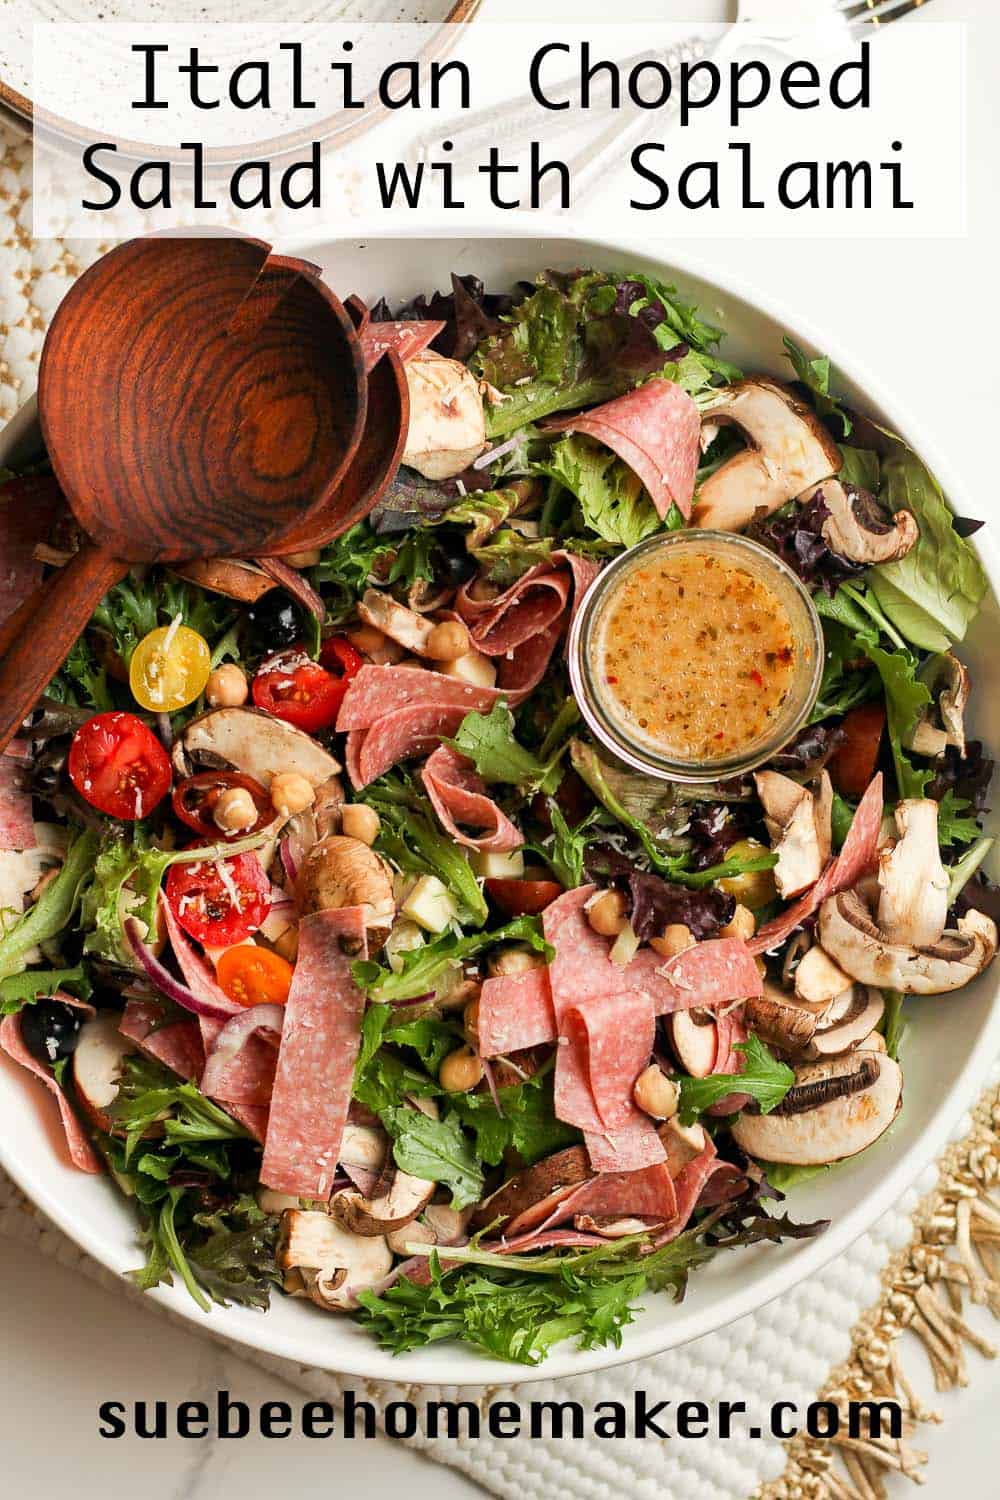 A large bowl of Italian chopped salad with salami.